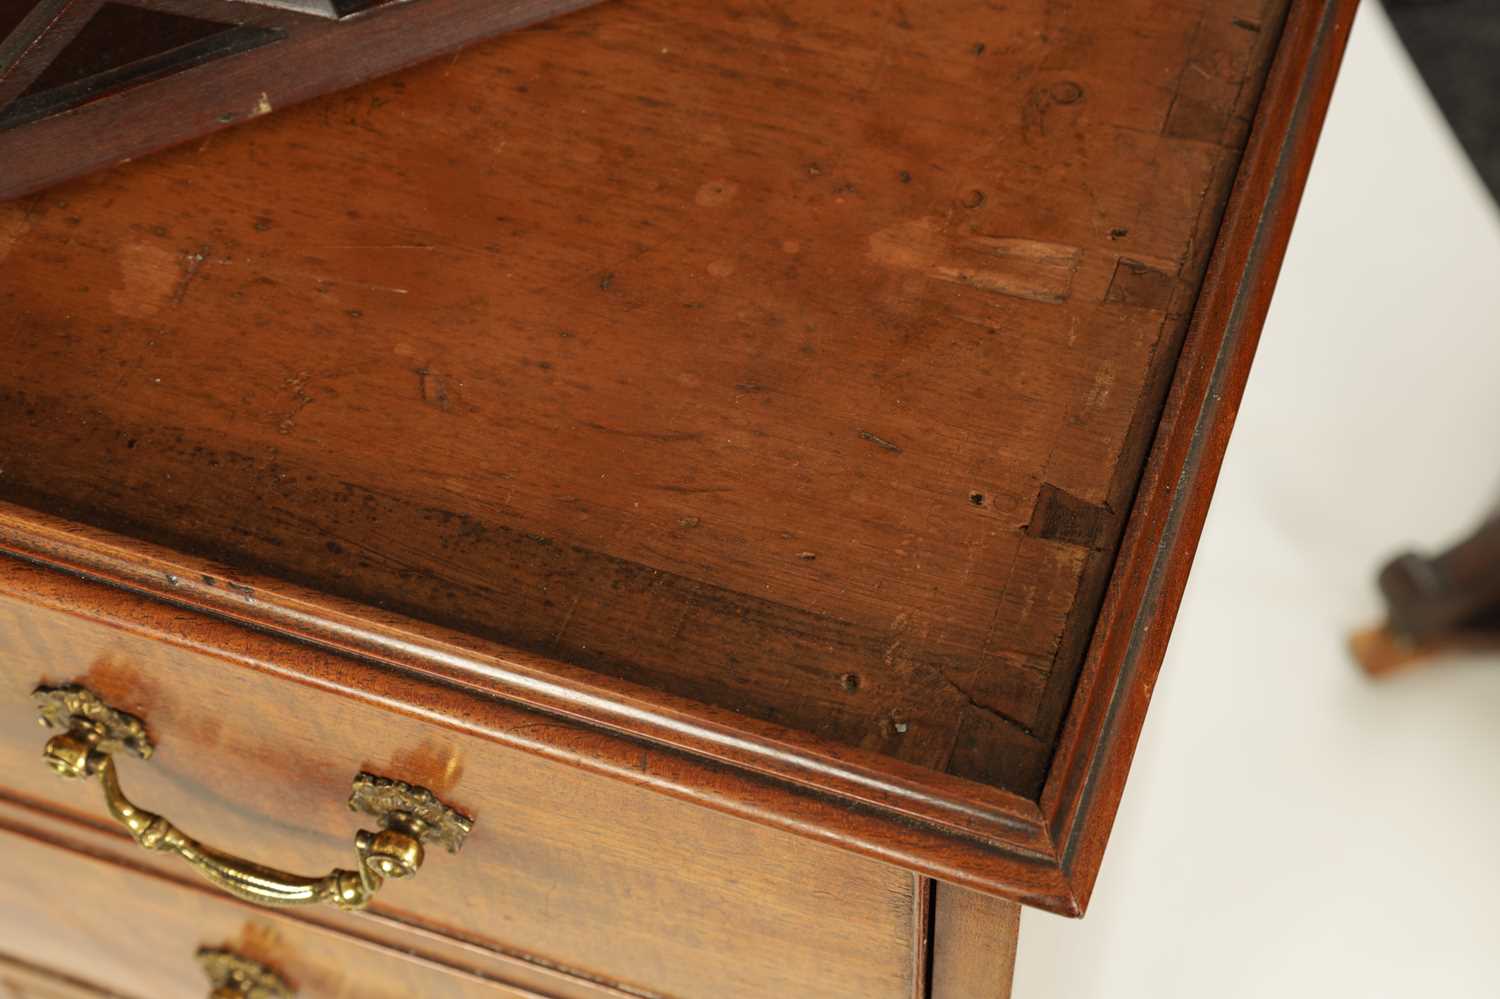 A RARE GEORGE III MAHOGANY LIBRARY SECRETAIRE CHEST OF DRAWERS WITH DETACHABLE BOOK CARRIER - Image 7 of 16